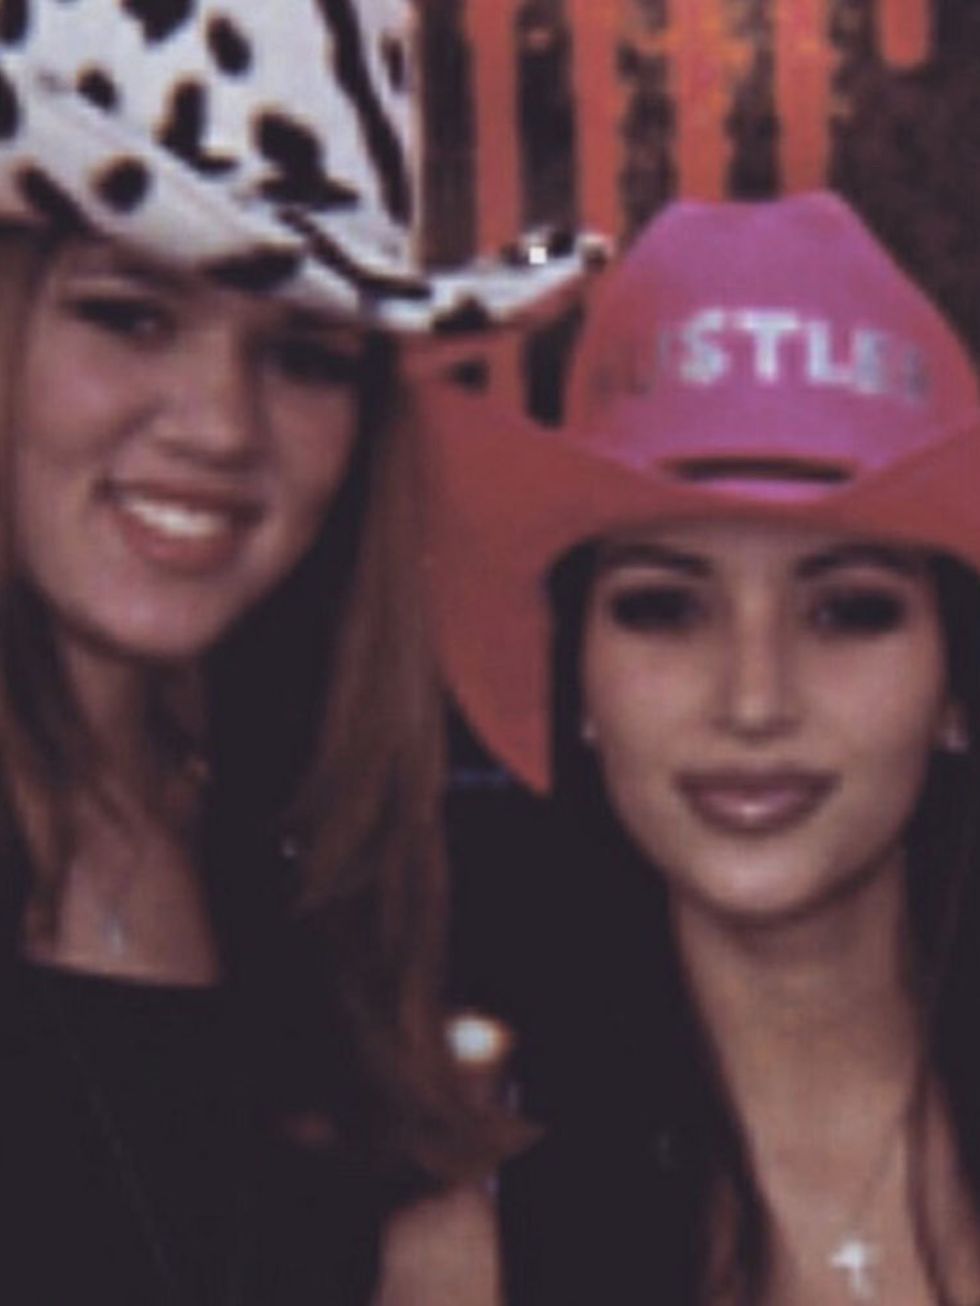 @kimkardashian When you're sick in bed & going through old pics! Khloe don't kill me lol This was my 18th birthday & Khloe took me to a Backstreet Boys concert! #WhatAreThoooseHats